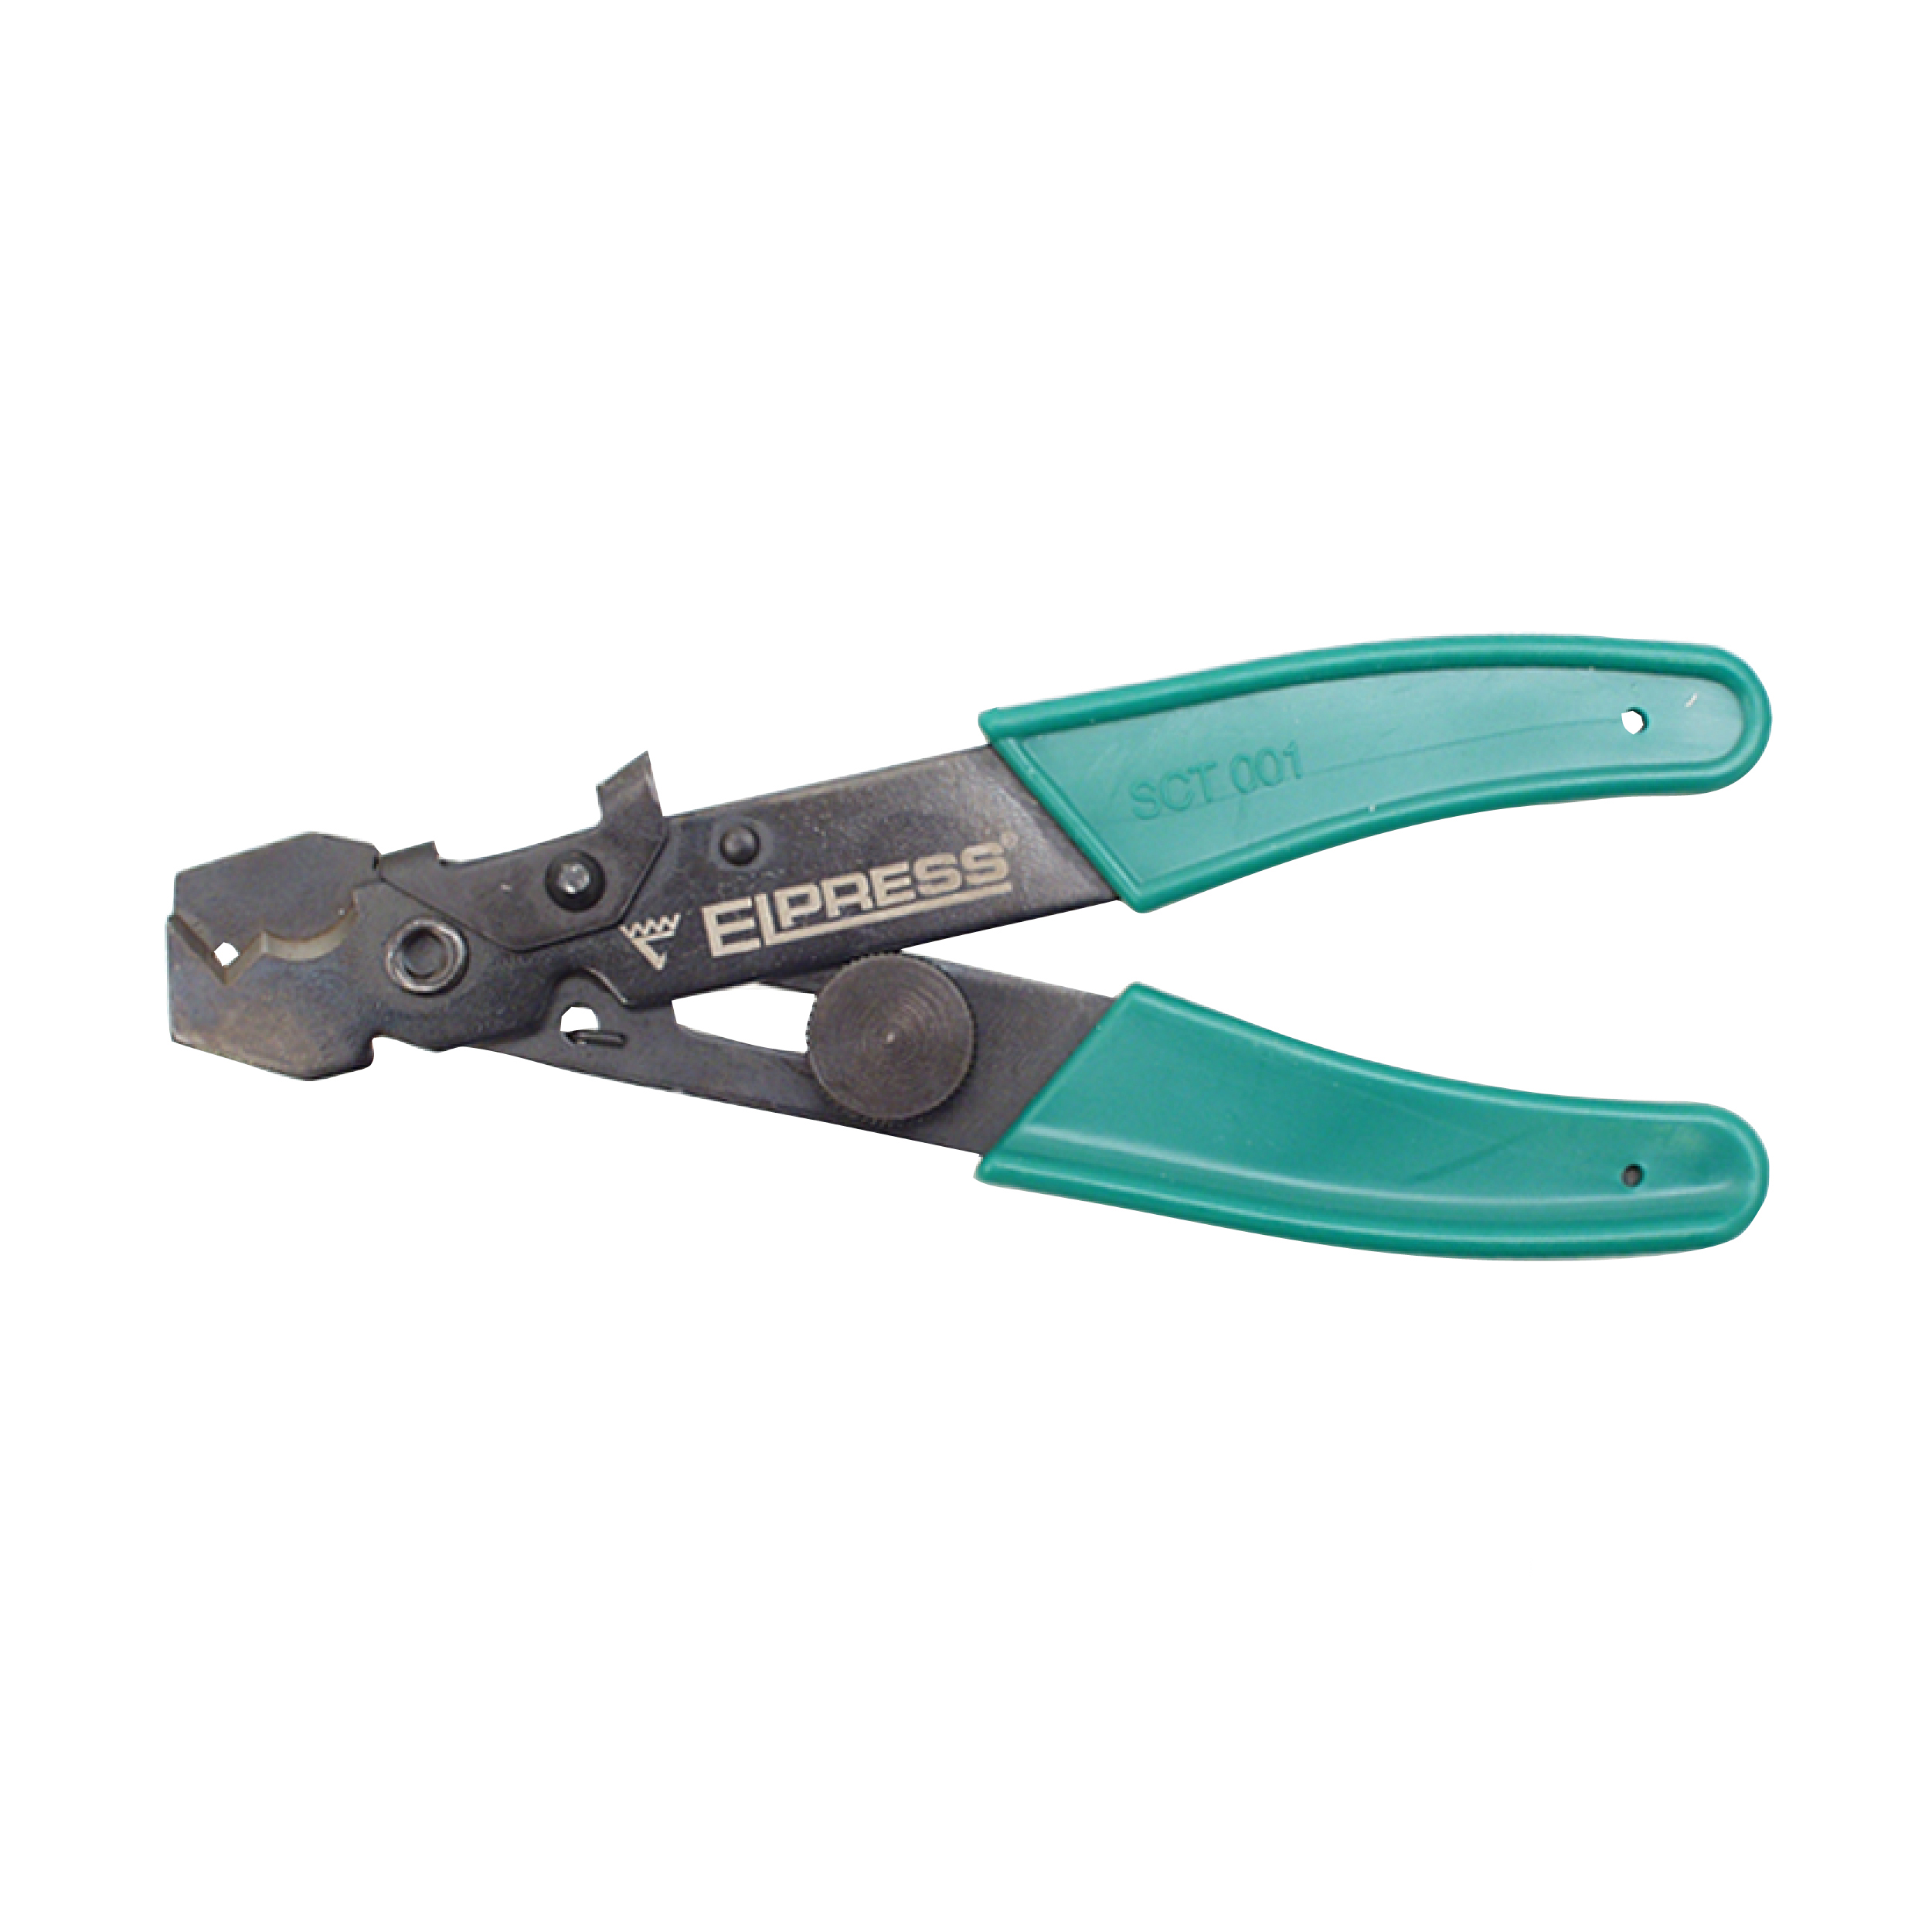 Elpress SCT001 Cutting and Stripping Tool (0.5-6mm²)